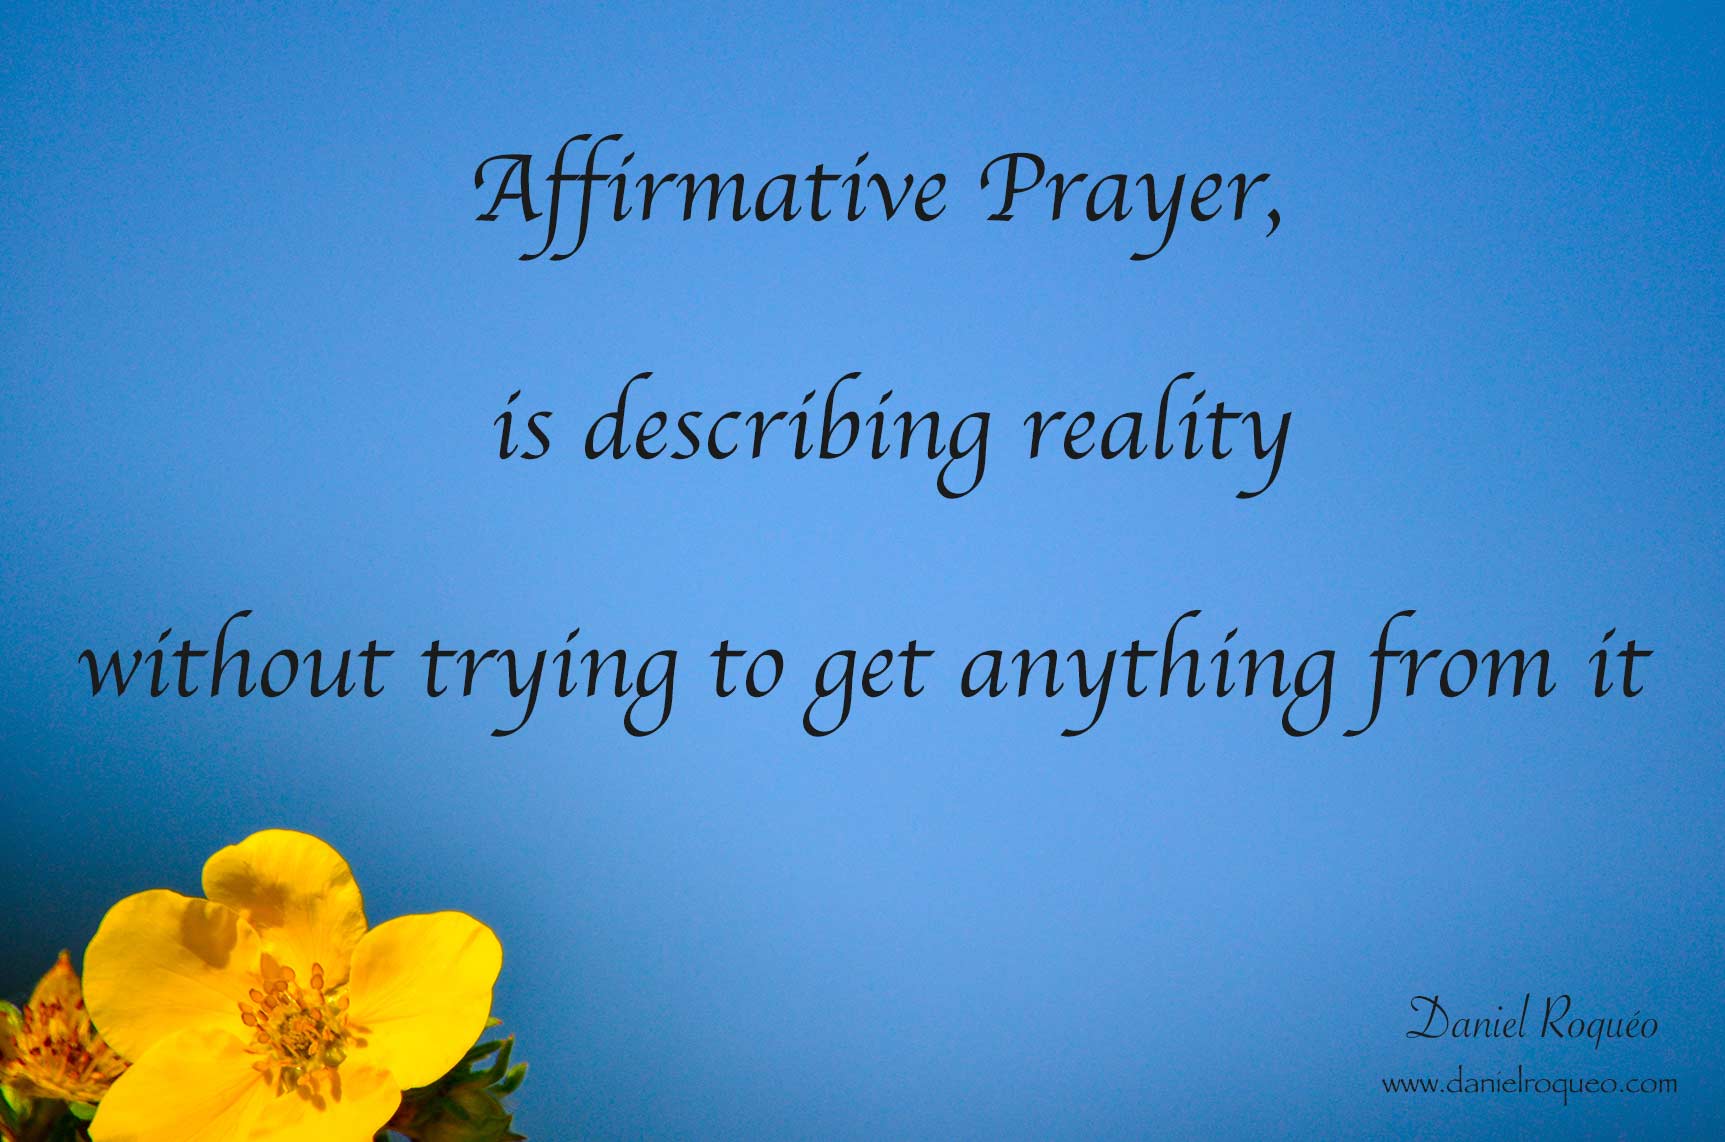 Affirmative prayer is describing reality without trying to get anything from it